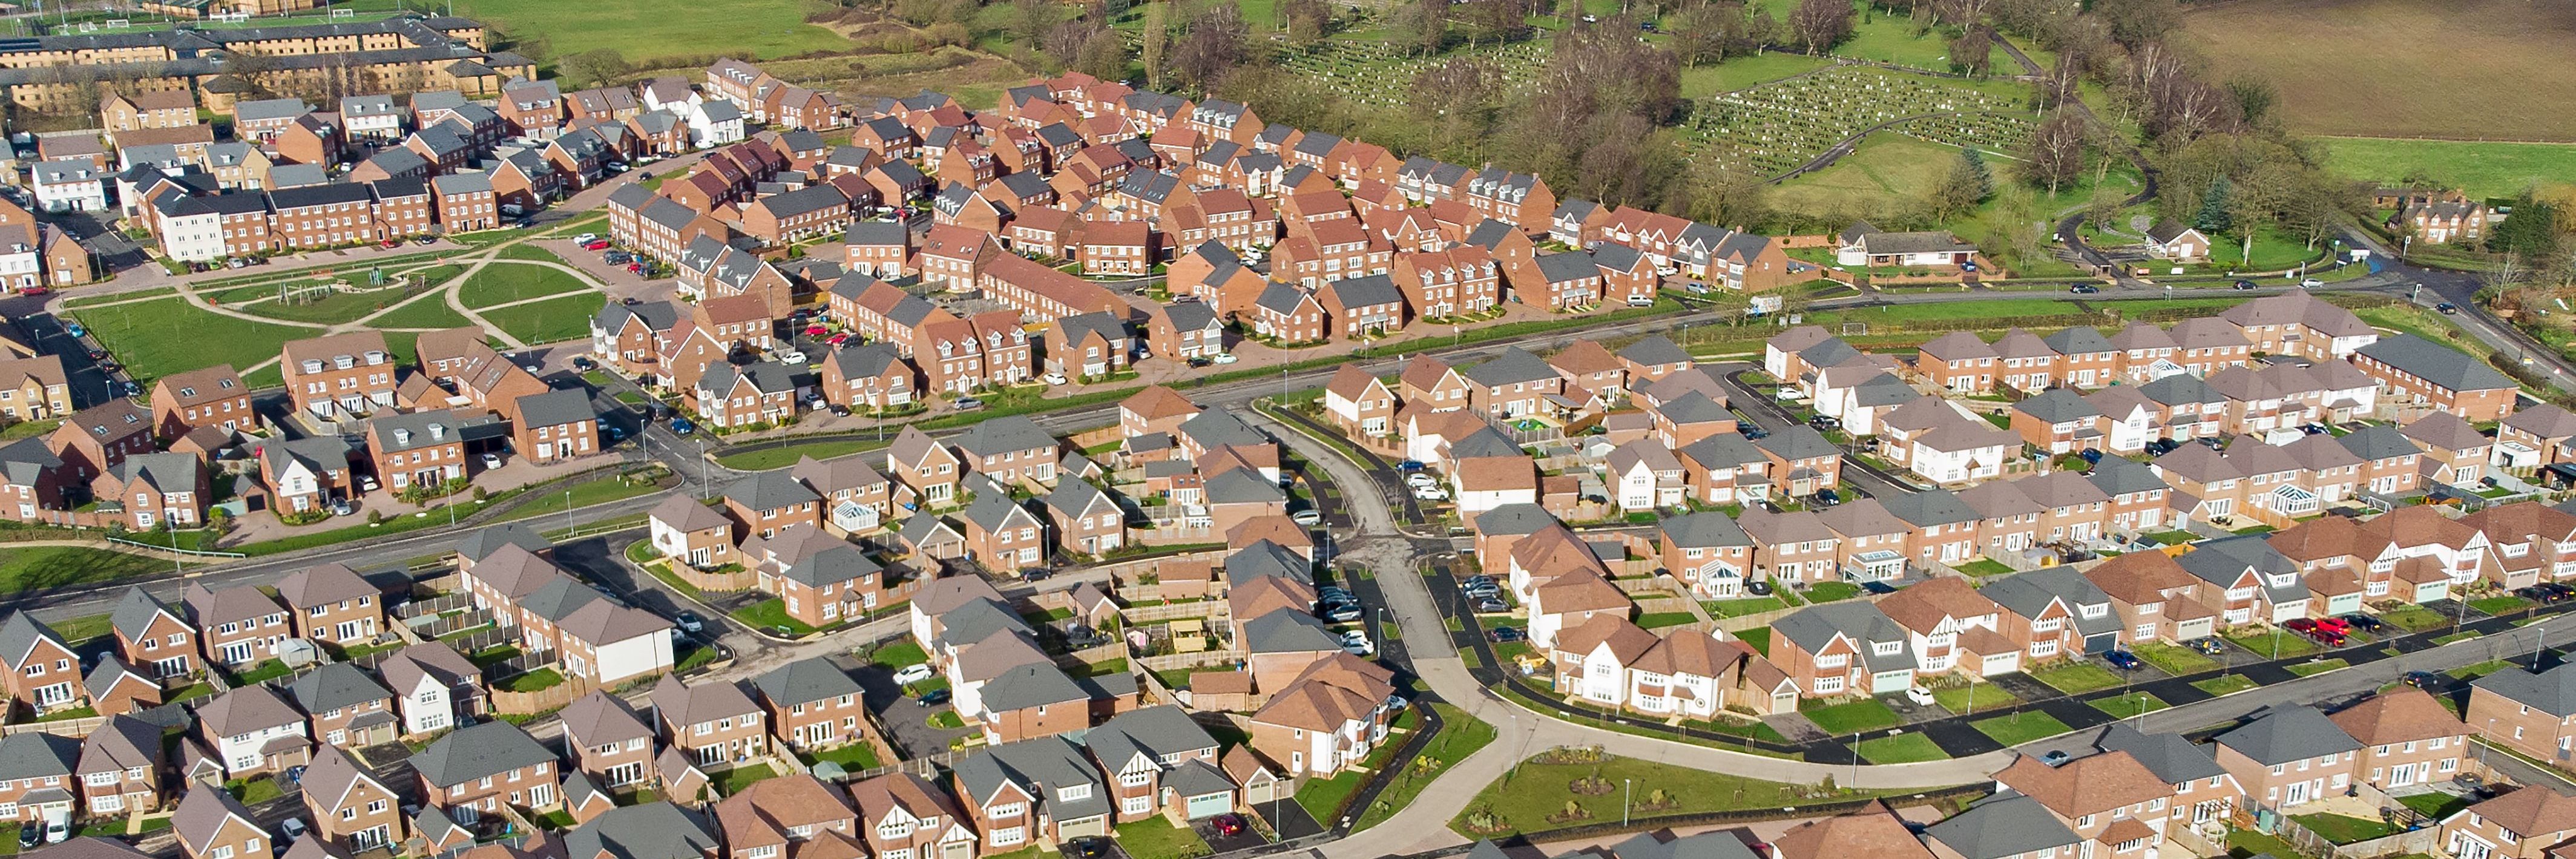 Social Housing & Shared Ownership - An Update for Conveyancers